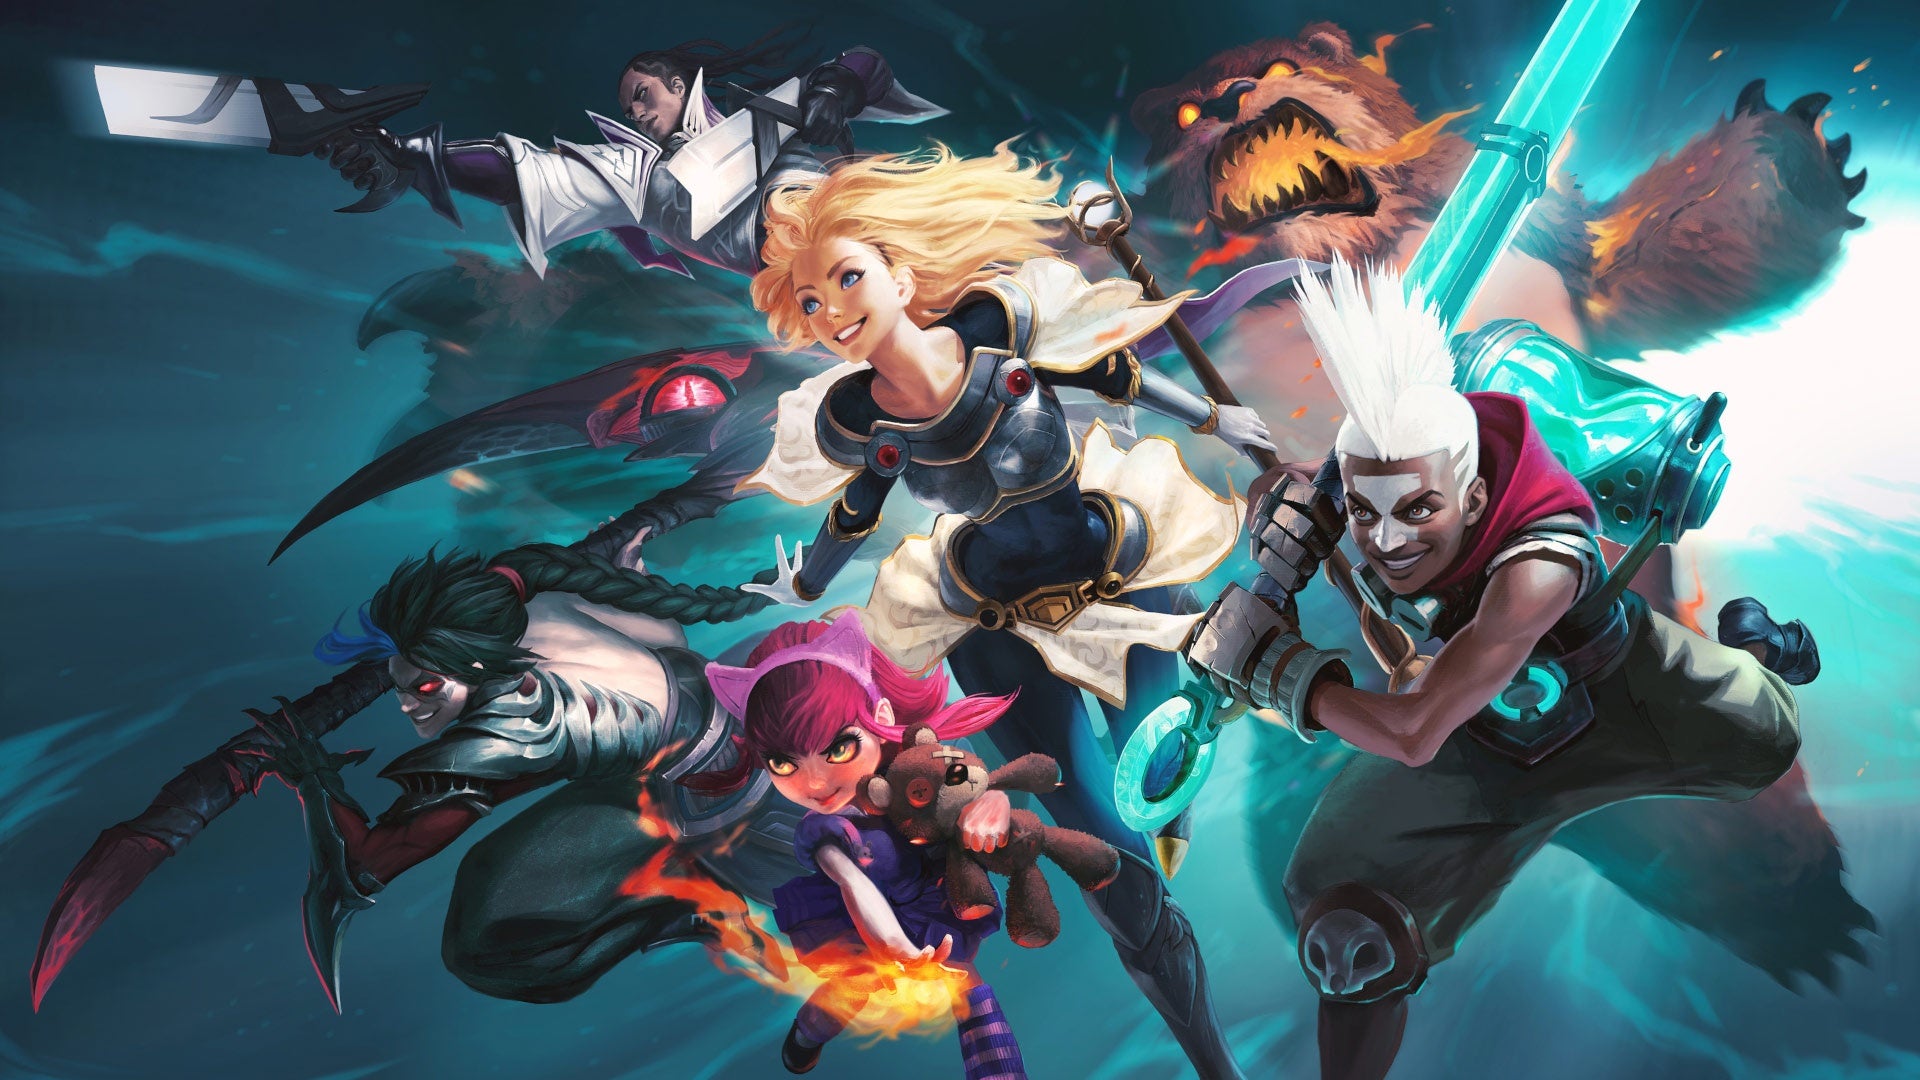 Key art from League Of Legends showing characters surging forwards, bearing weapons